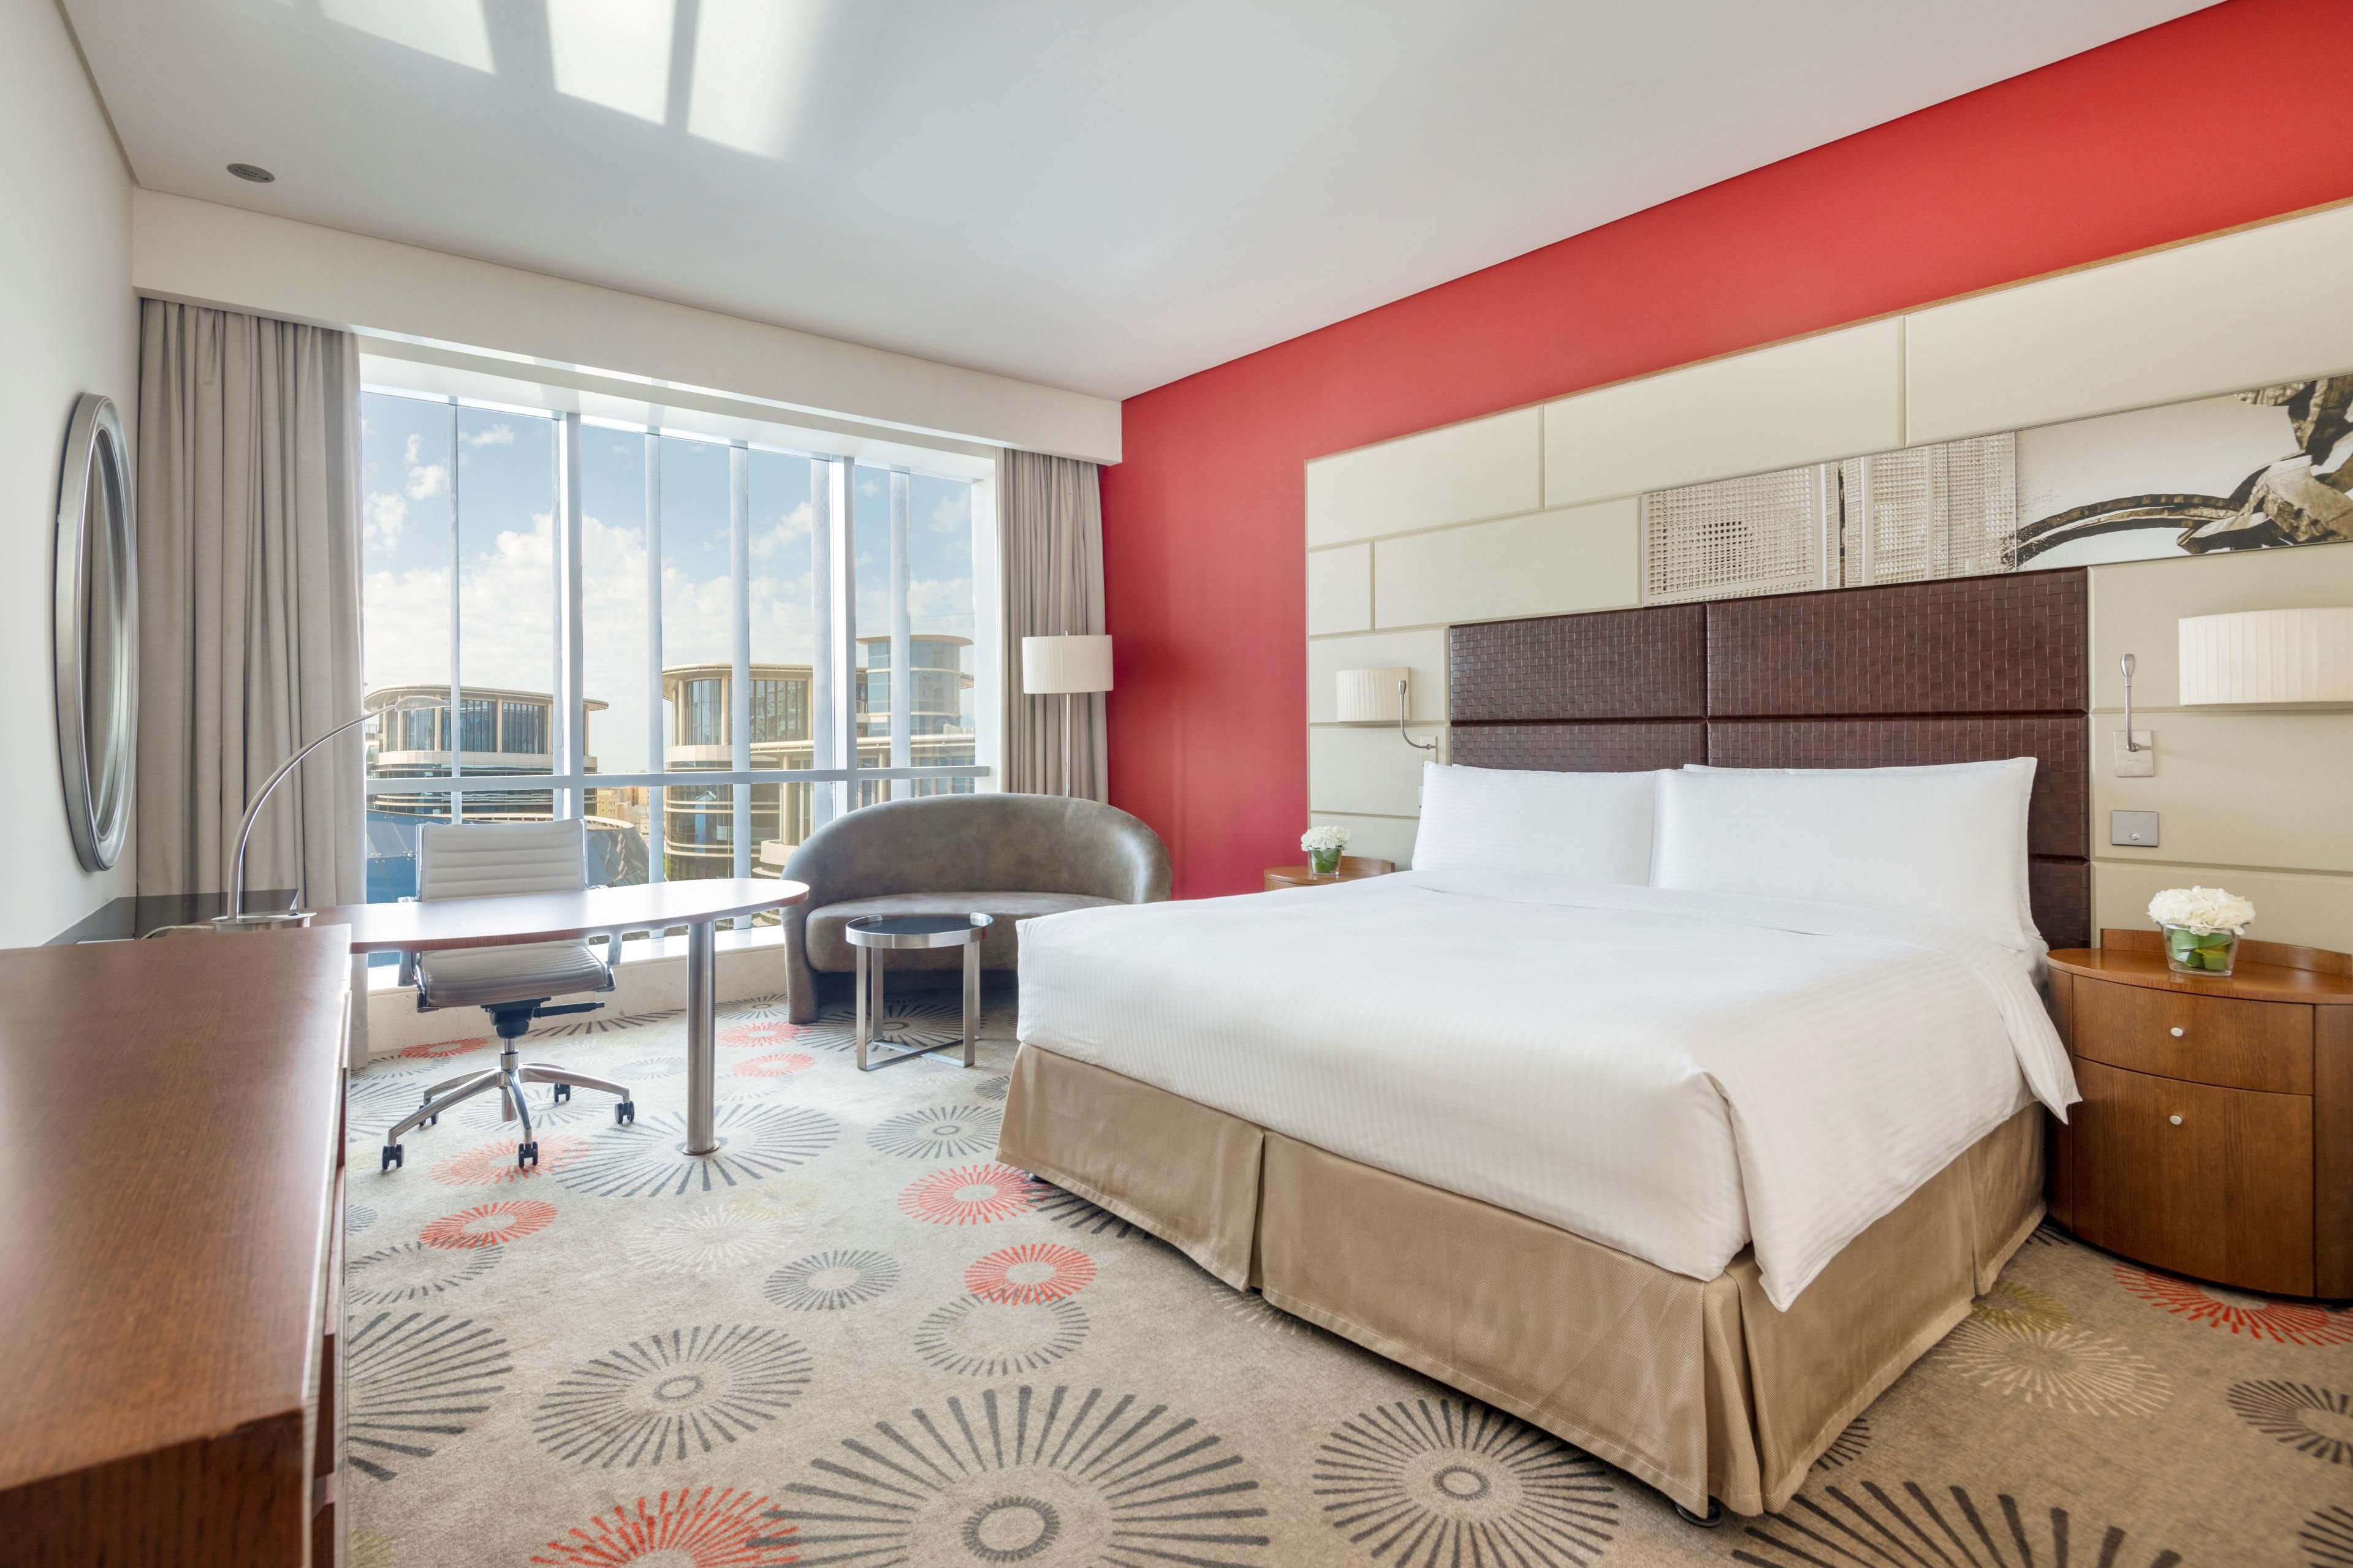 Stay in our well-appointed Deluxe Rooms overlooking the city